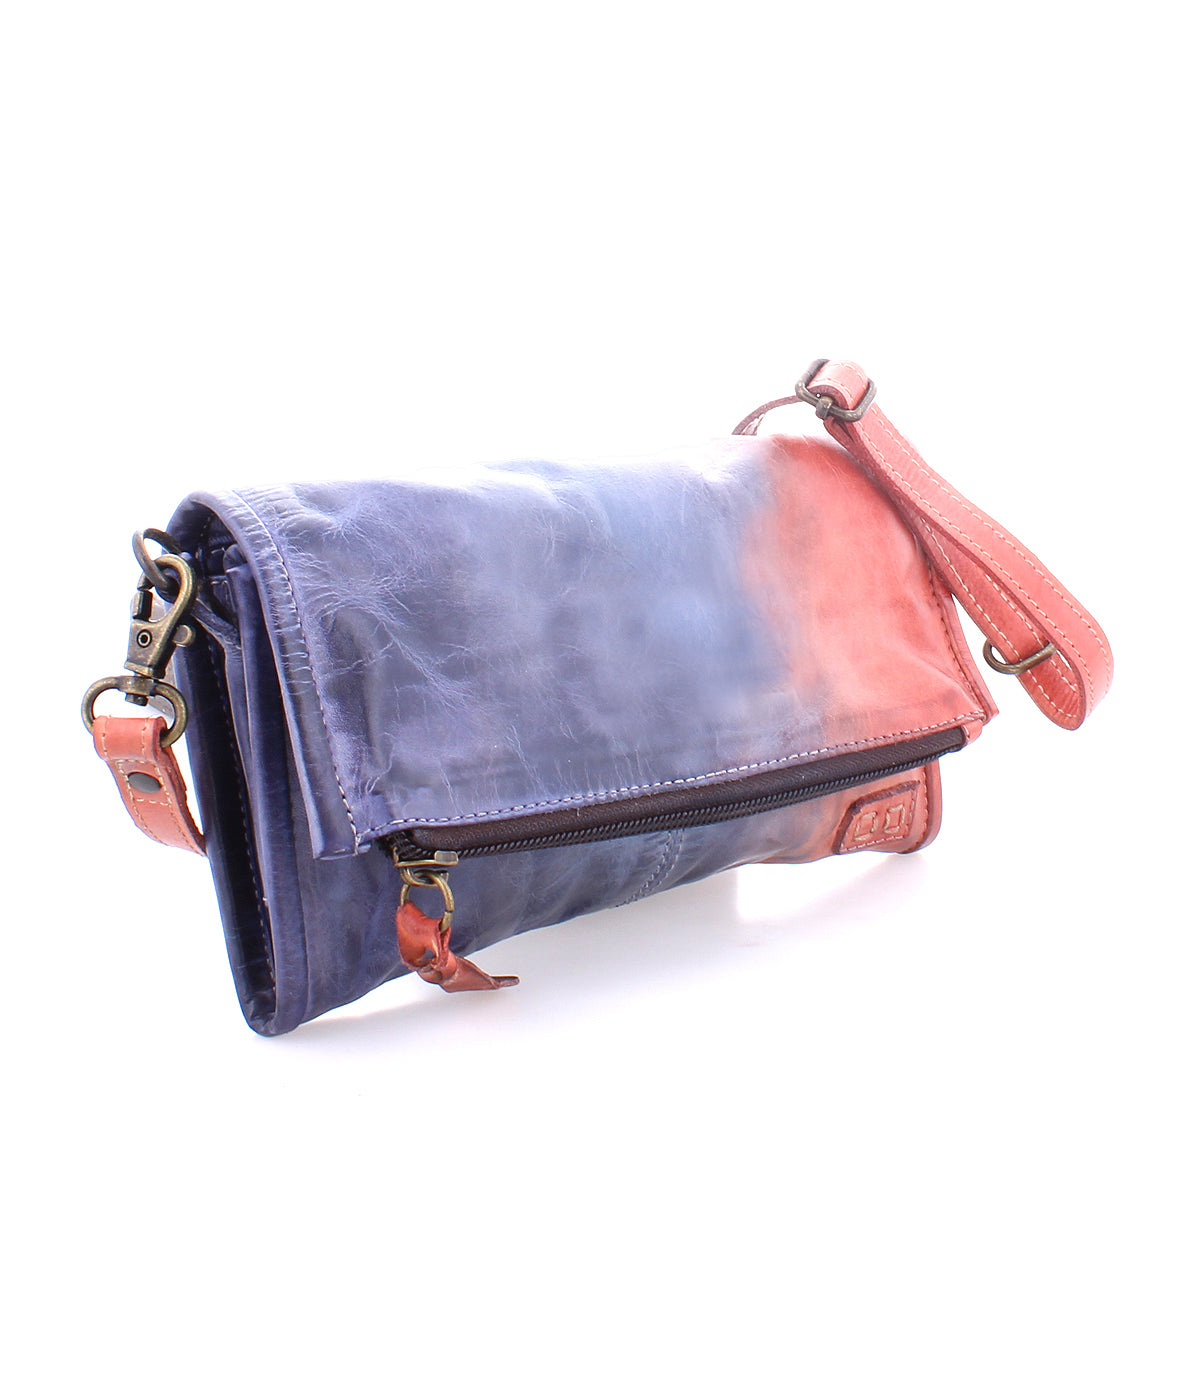 A Amina crossbody clutch with a gradient blue to pink color scheme and bronze hardware, isolated on a white background.